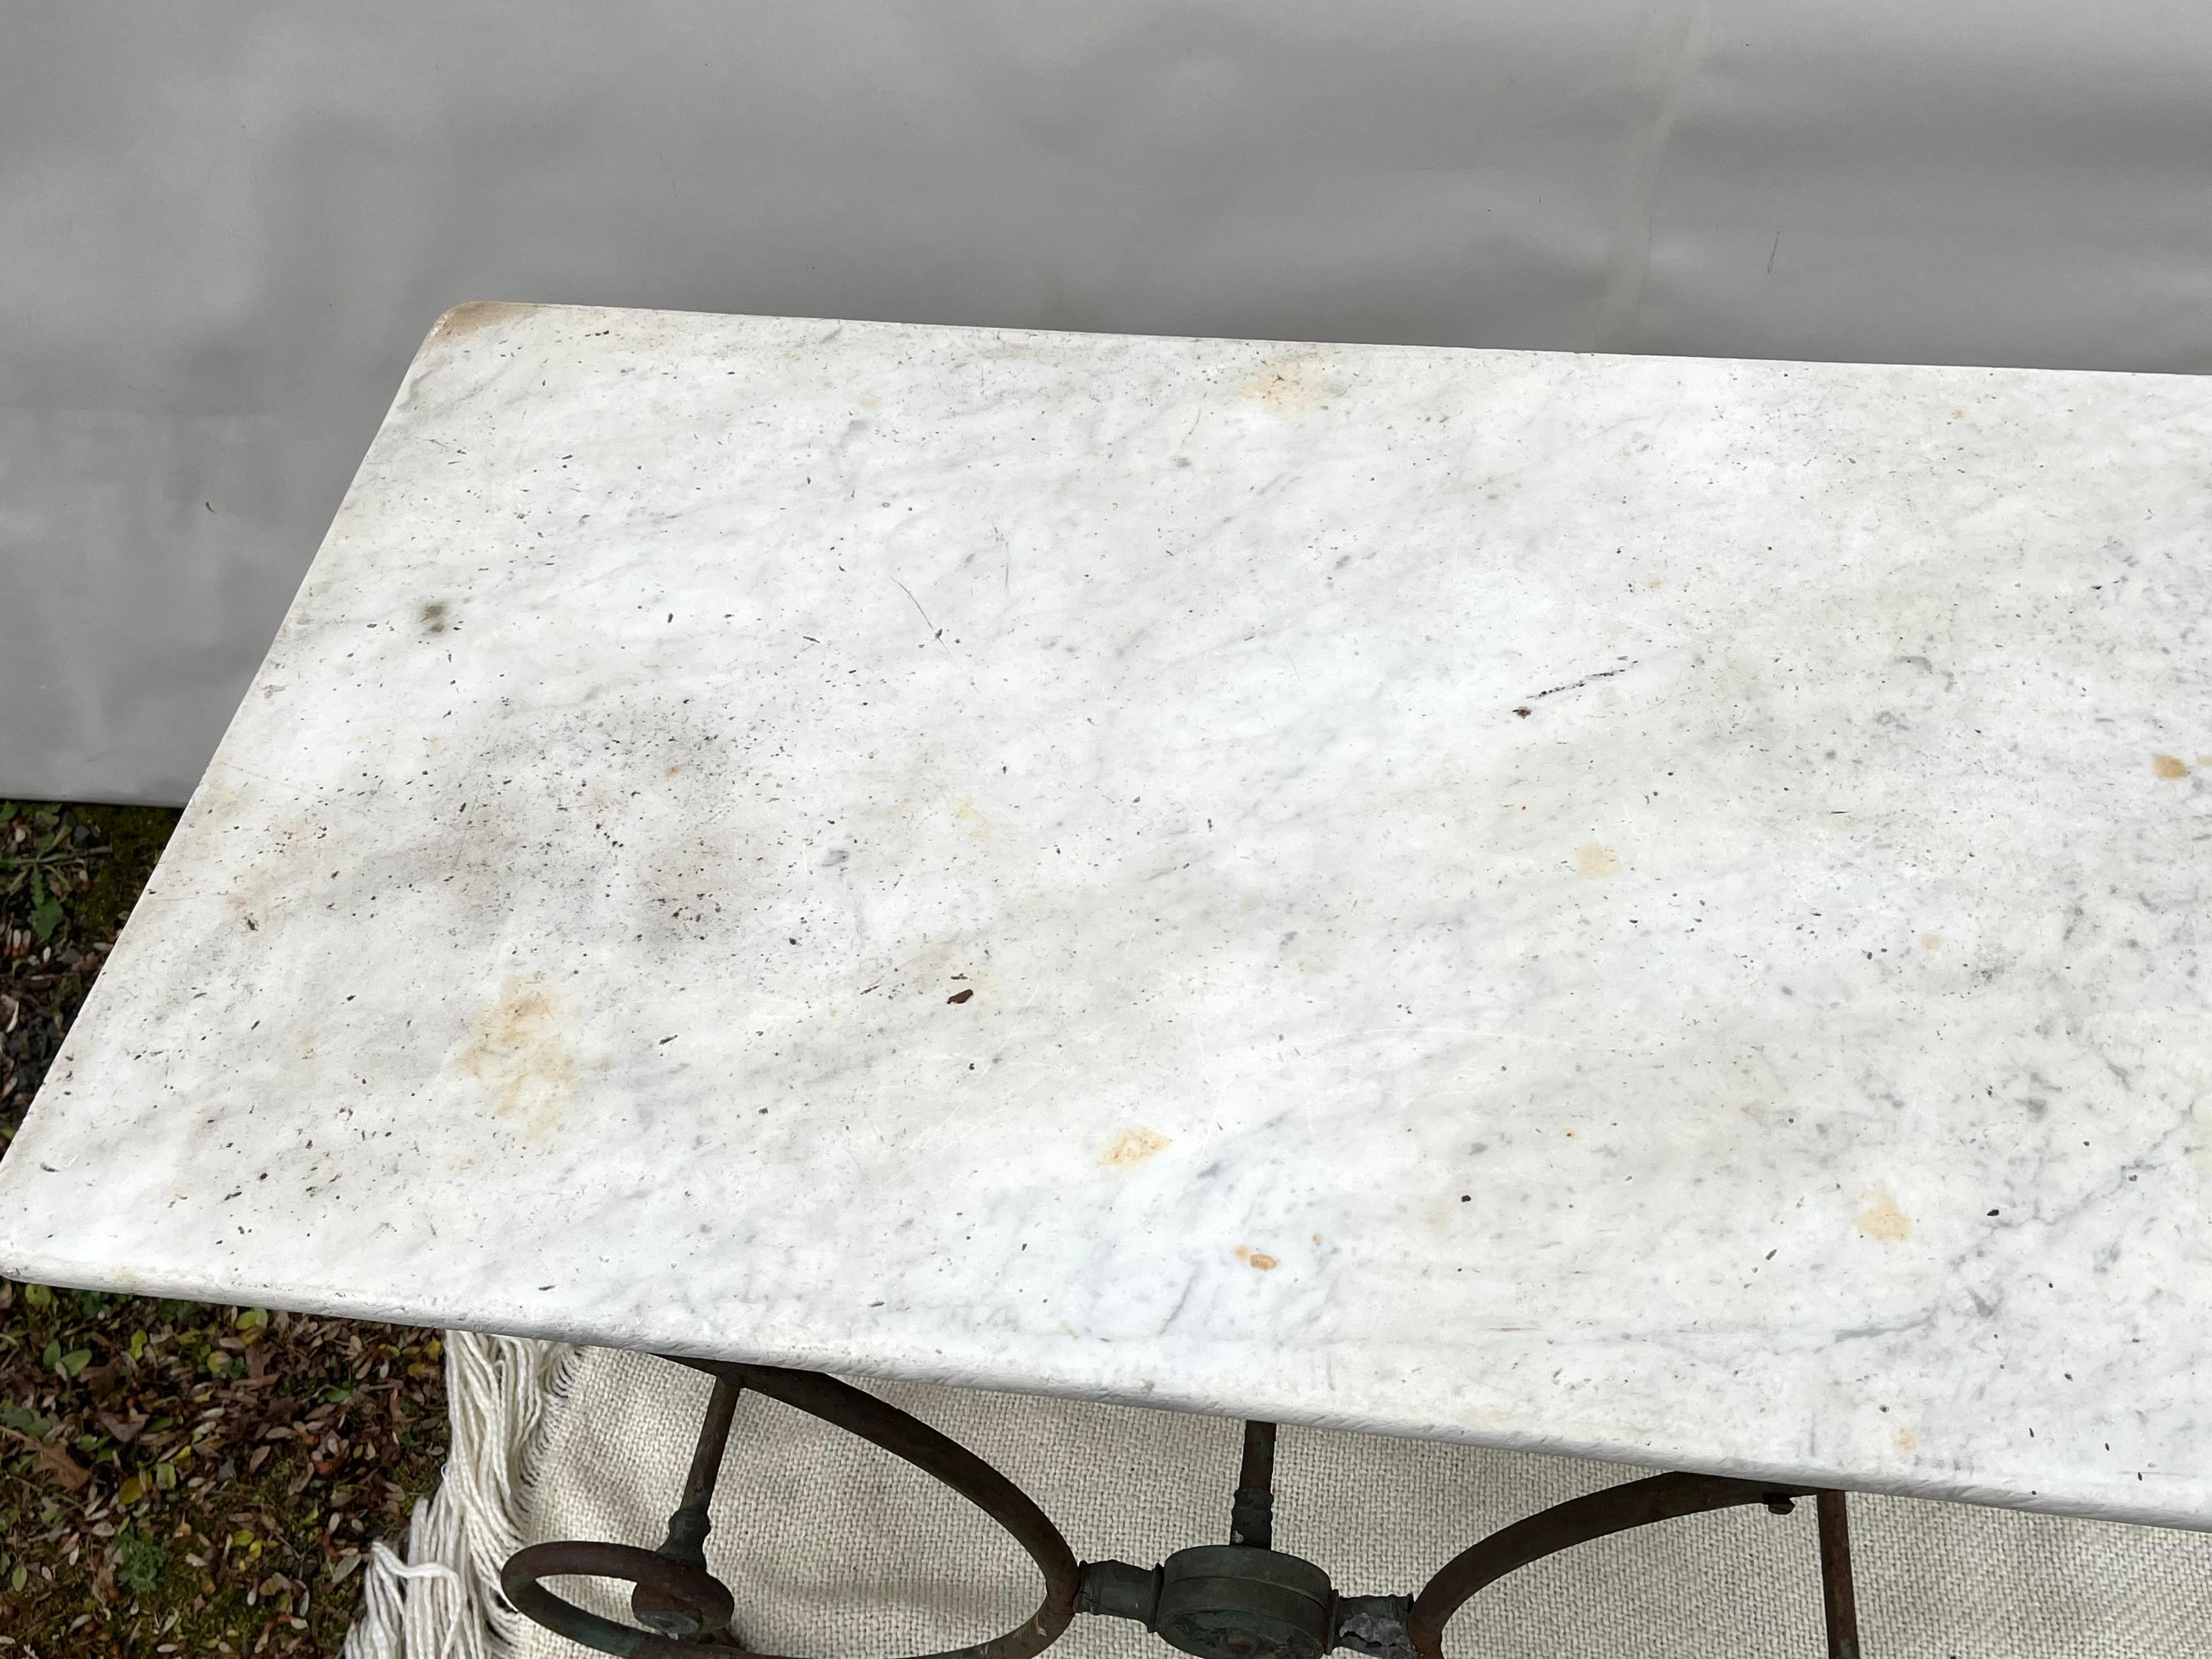 A 19th century French, wrought iron and white marble baker’s table circa 1870, weathered from being used outdoors, with patinated brass acorn finials and traces of old green paint. As the French say “dons son jus”.Tons of character. Would make a